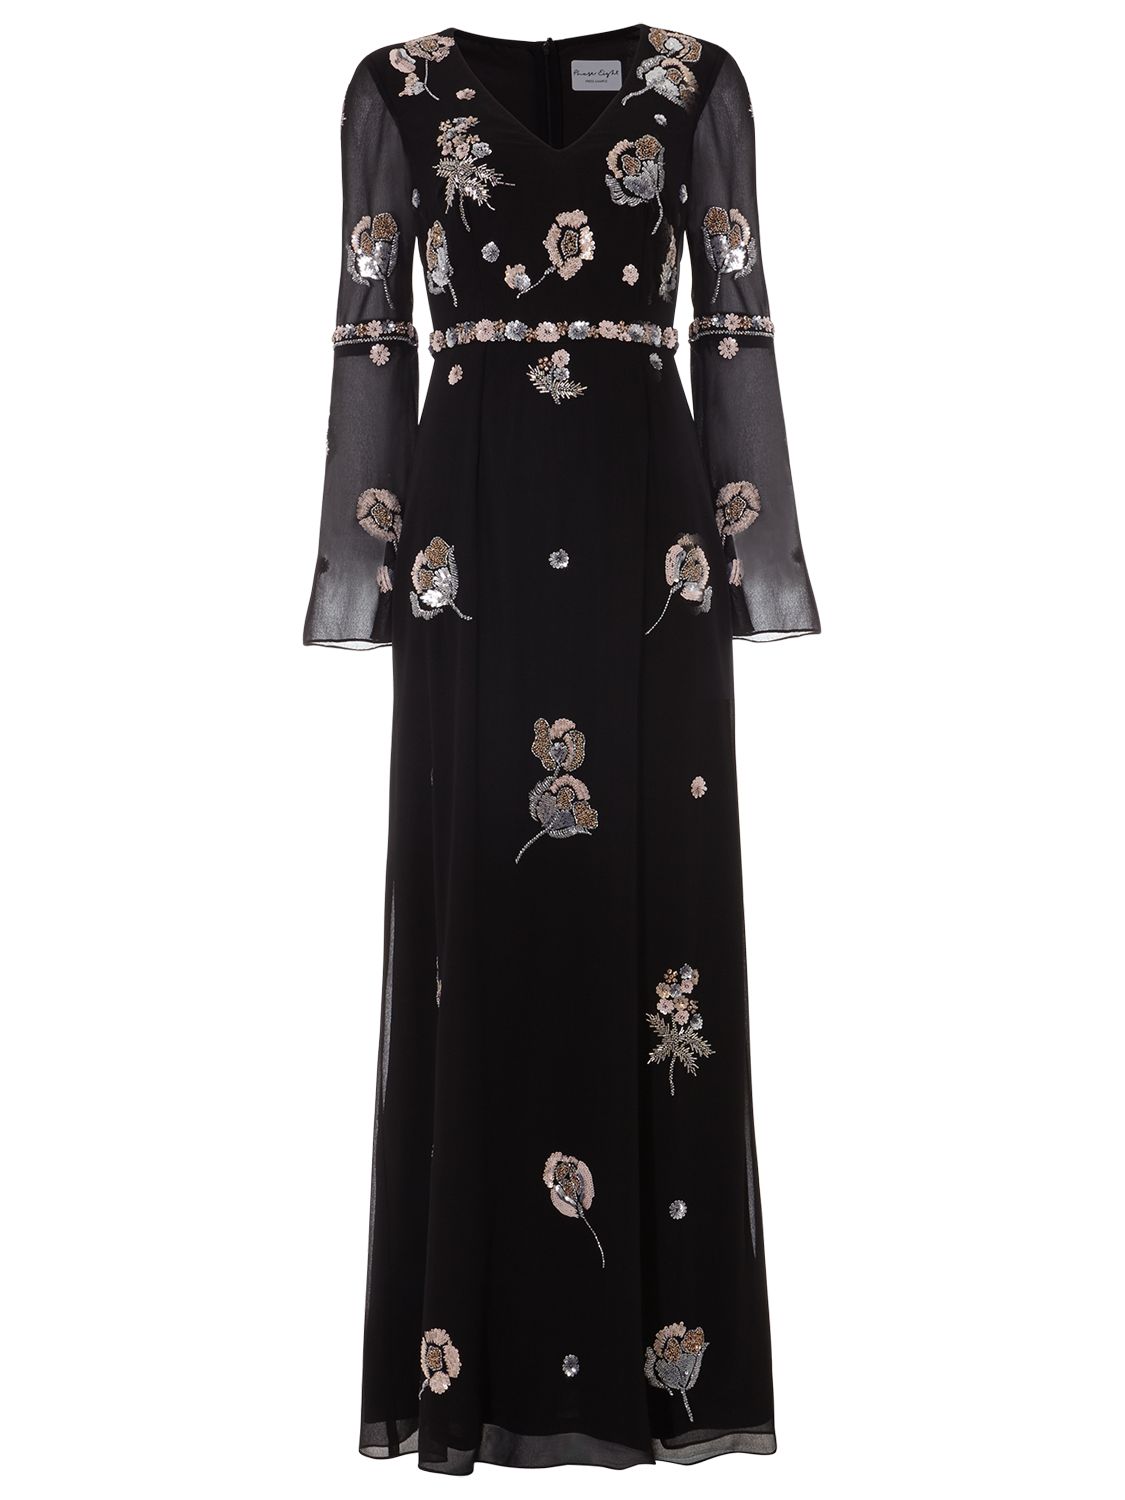 Phase Eight Collection 8 Beaded Flower Dress, Black